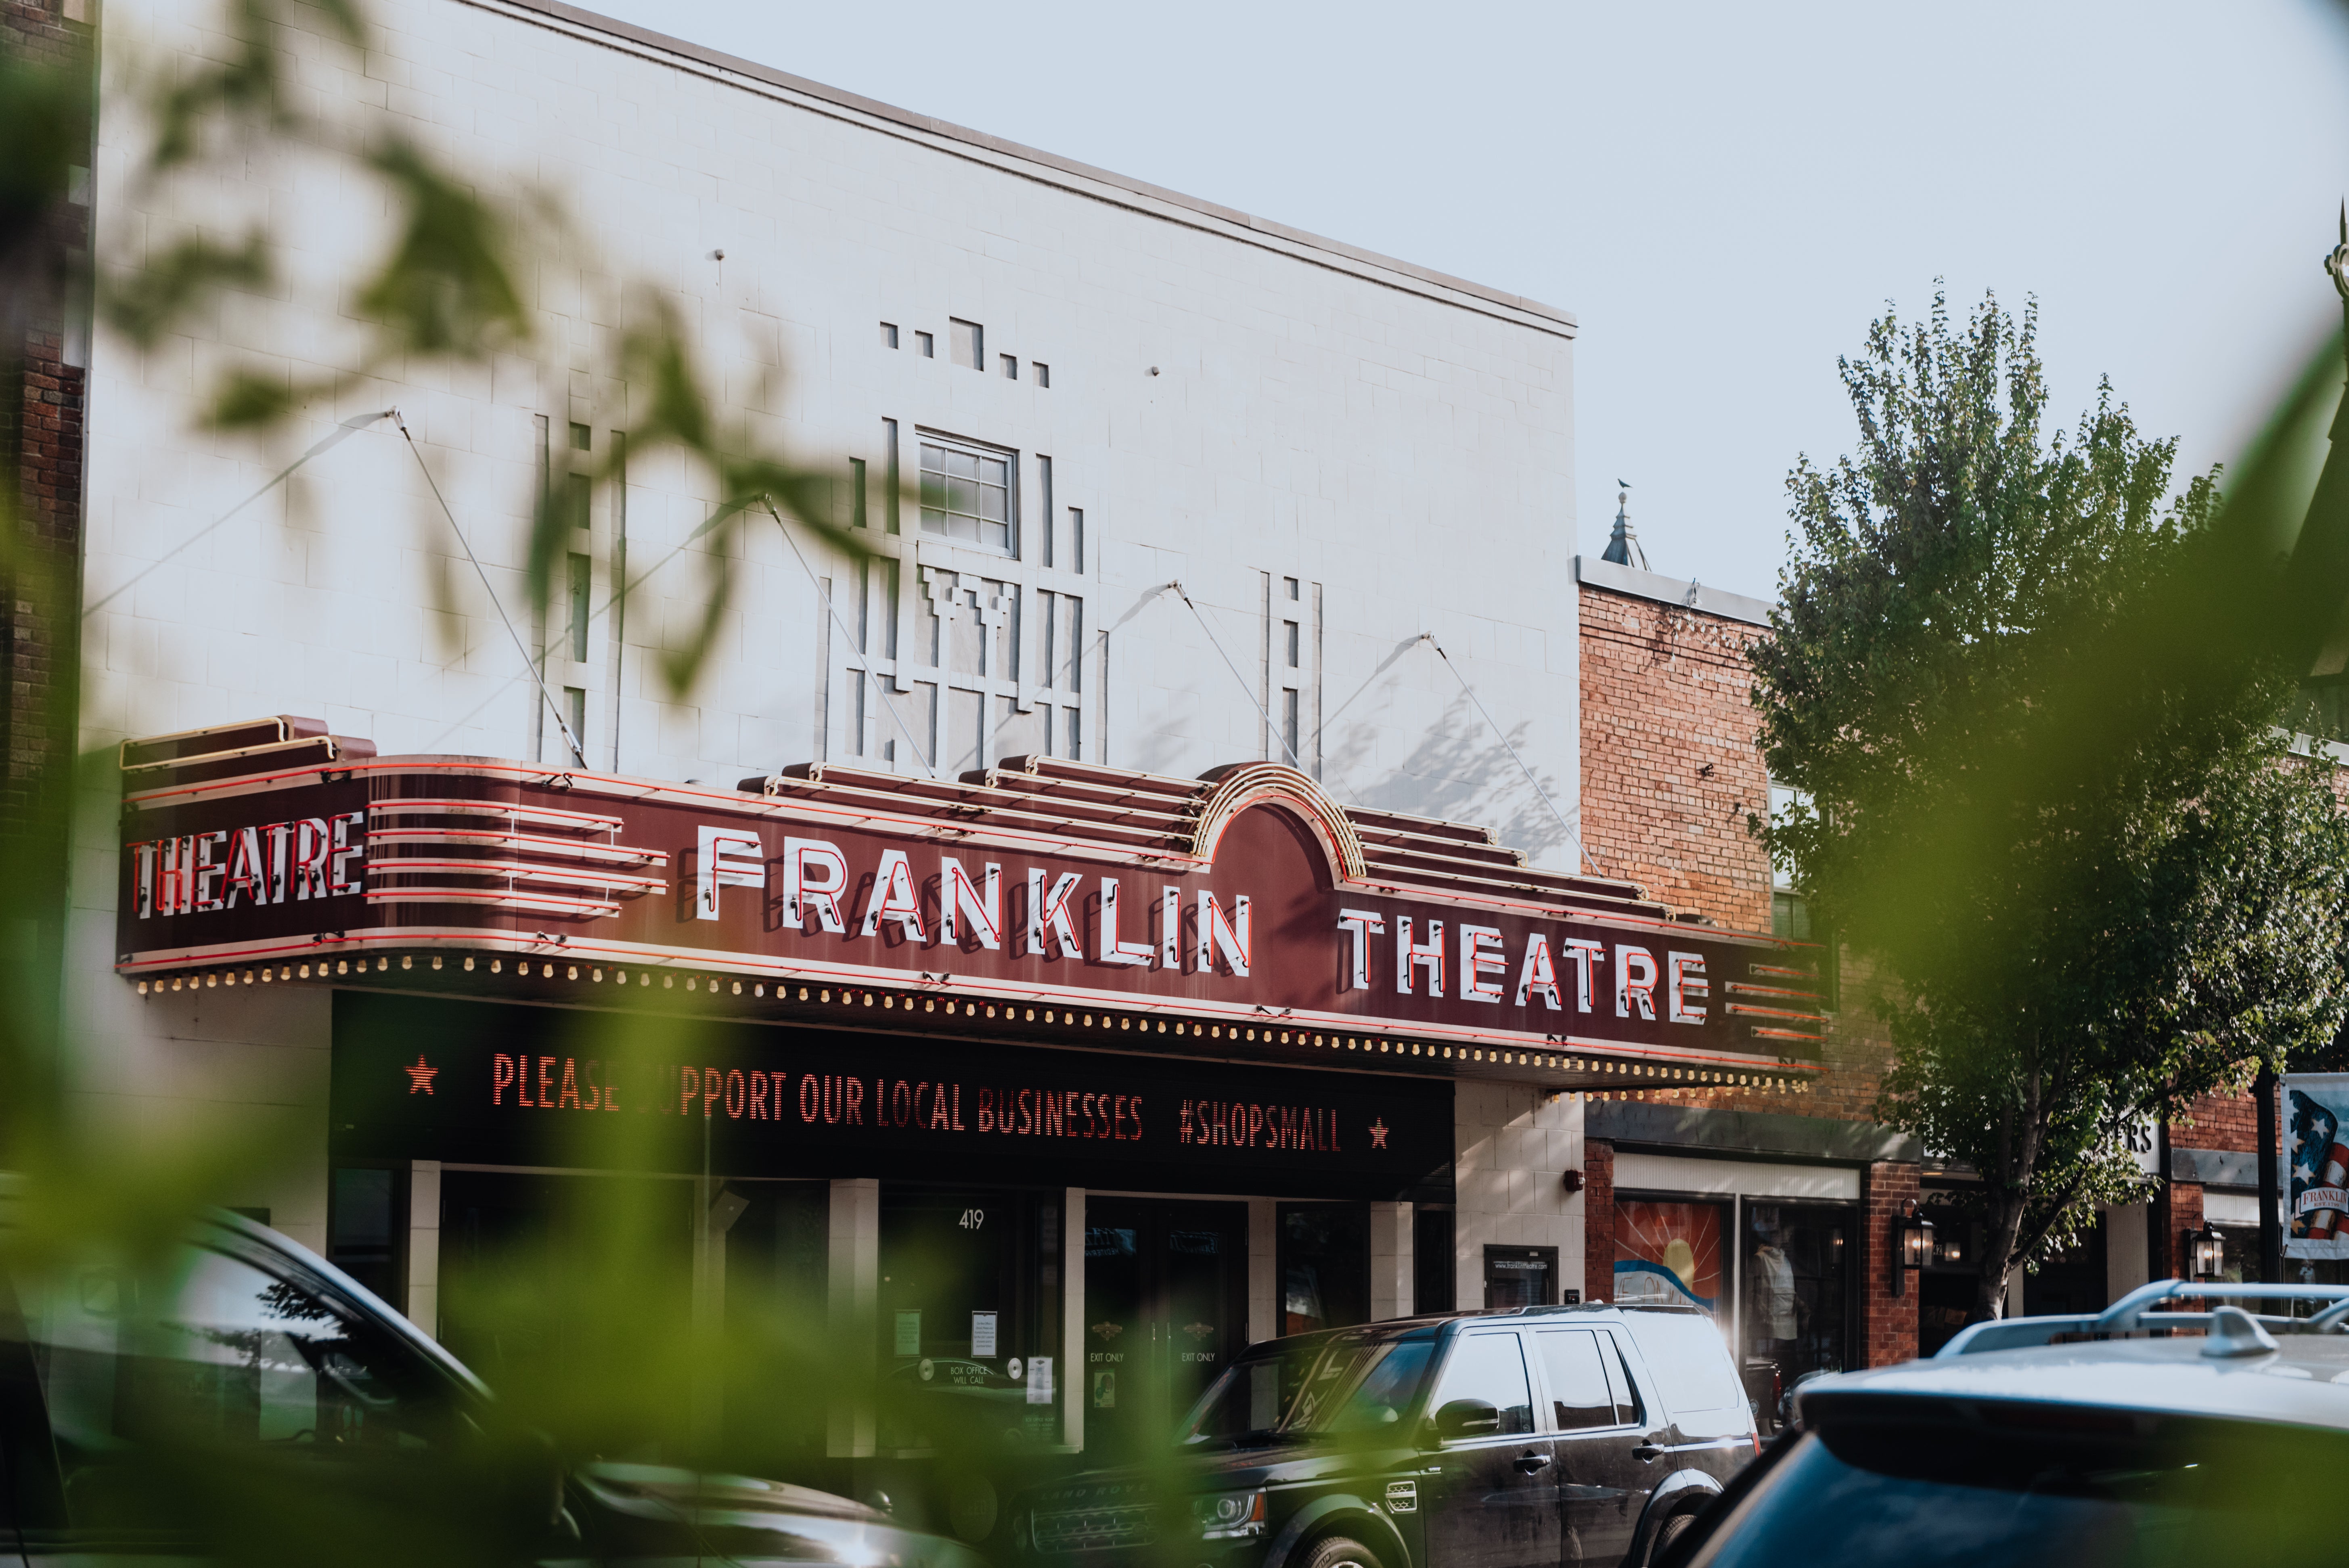 The Franklin Theatre has been on Main Street since the early 1930s and today is considered one of the best music venues in the world